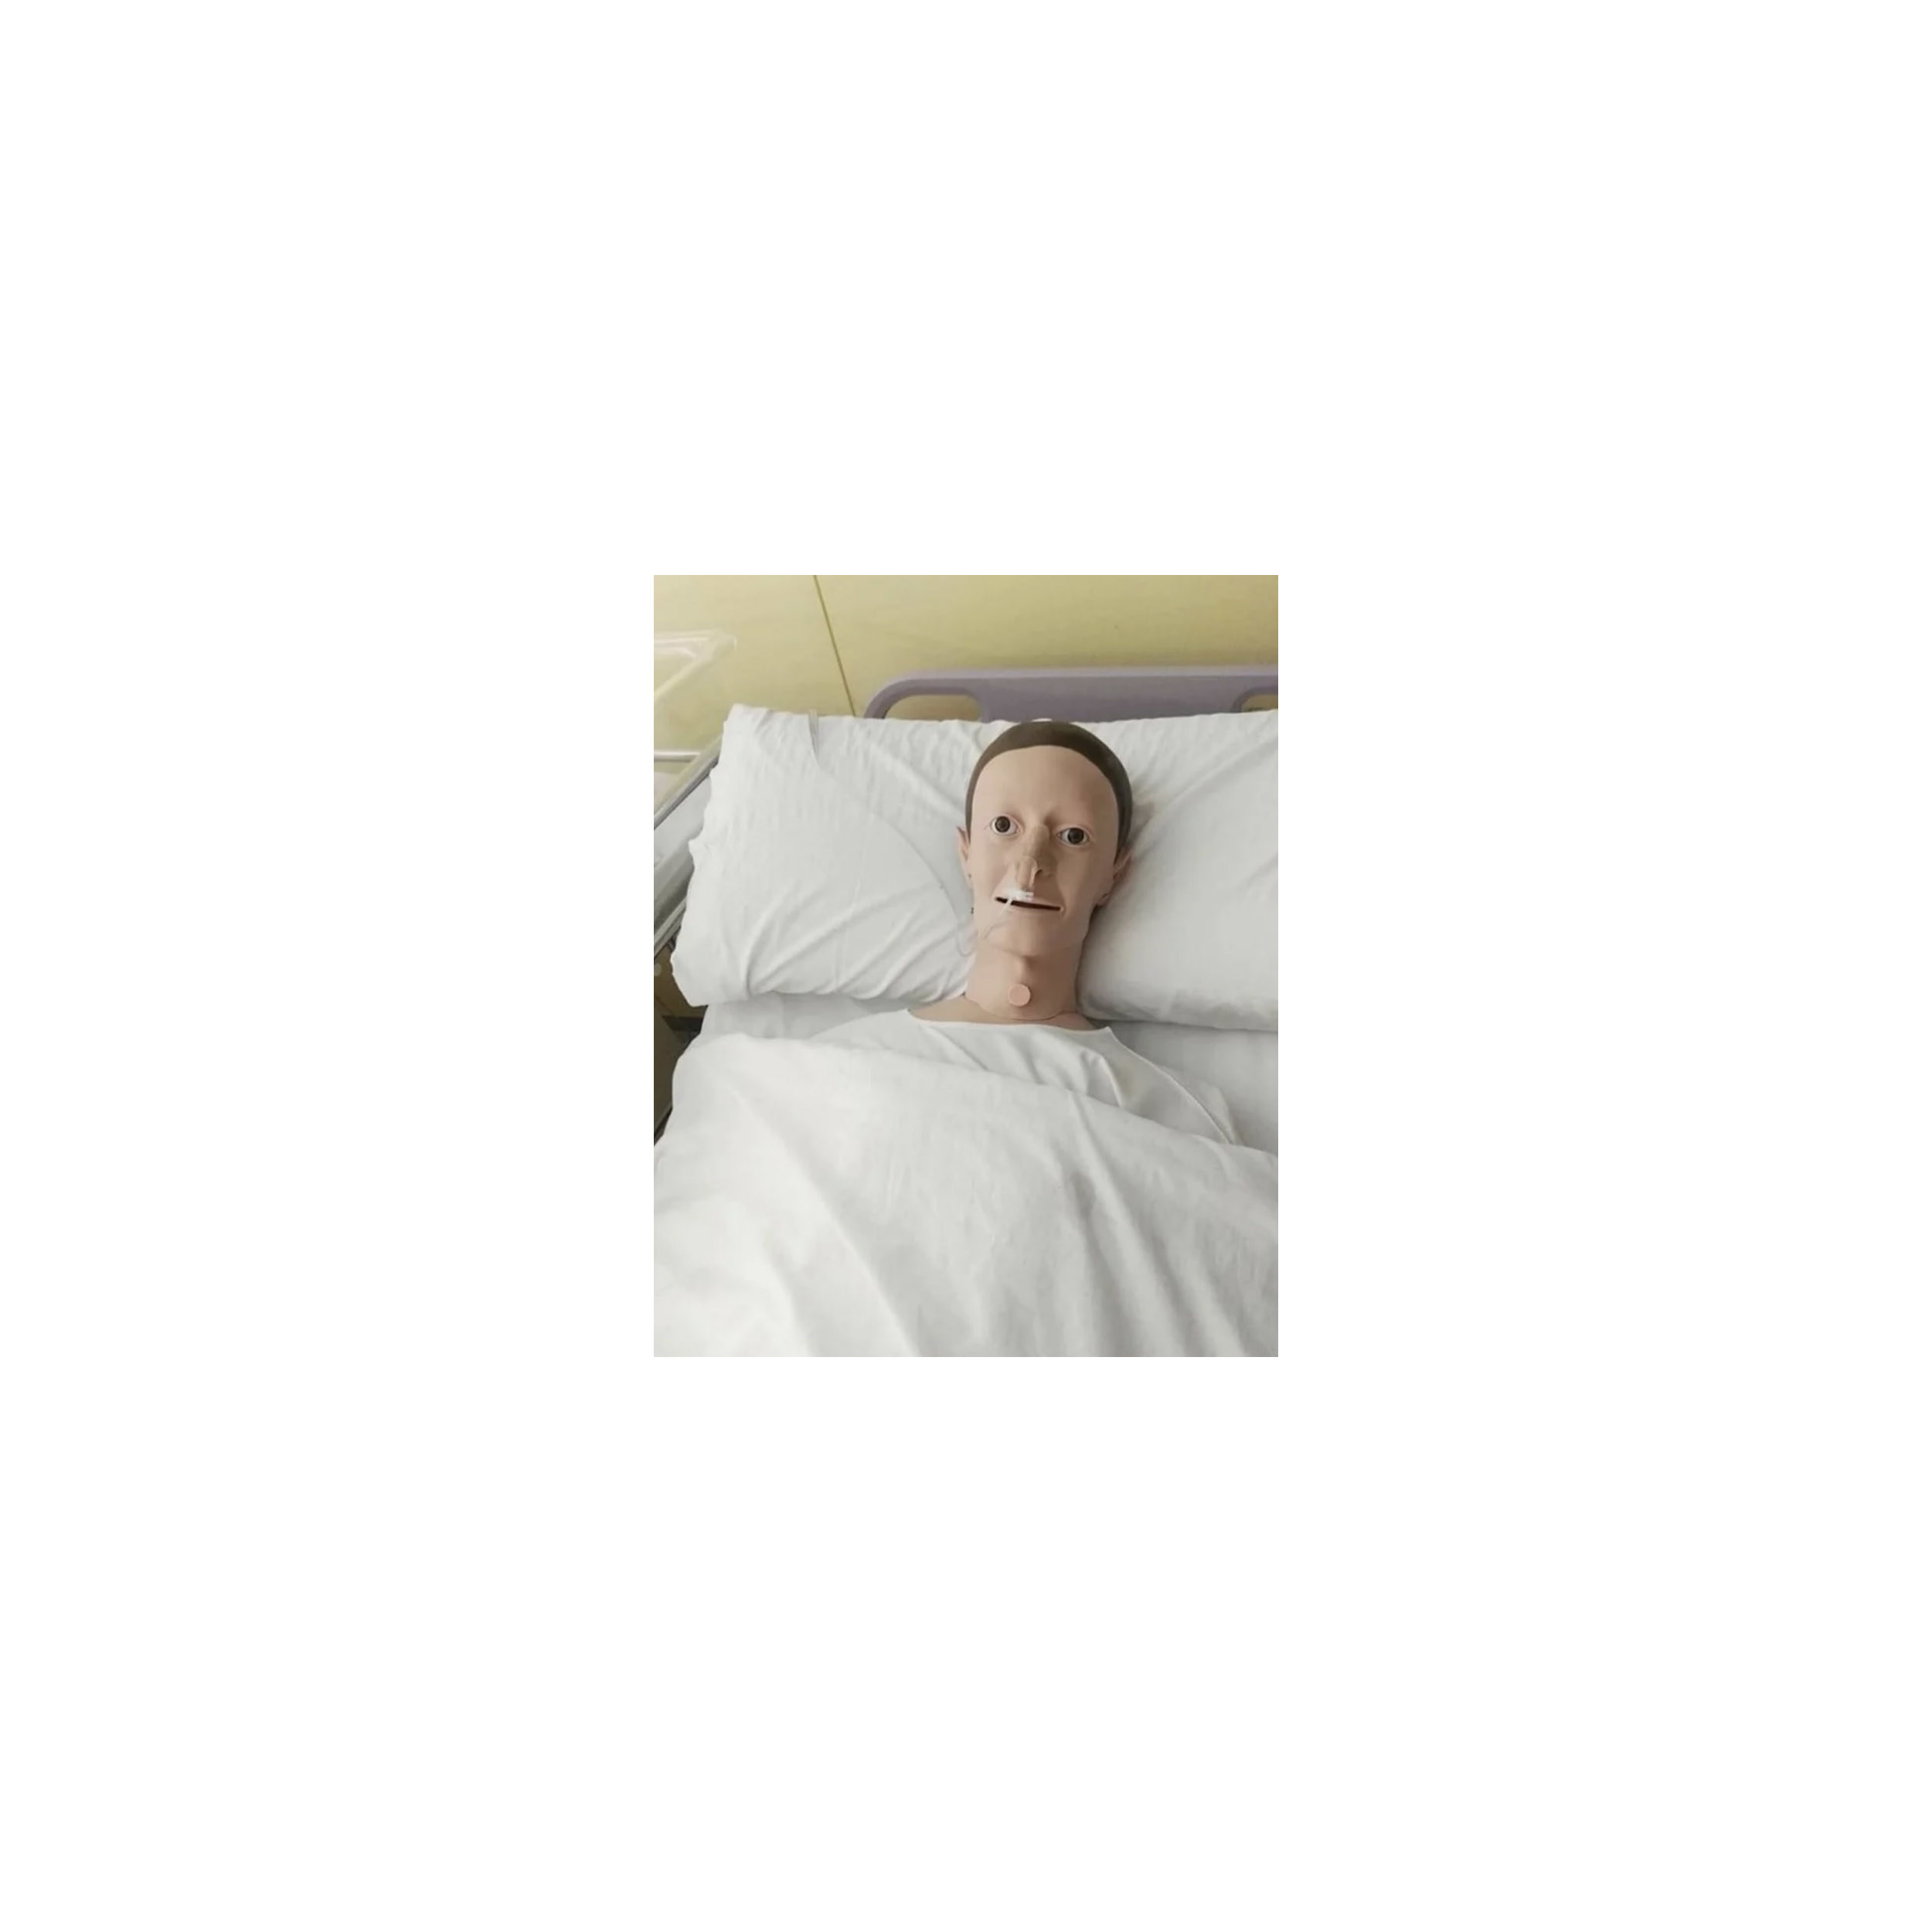 A person lying in a hospital bed with a Mark-like face or mask